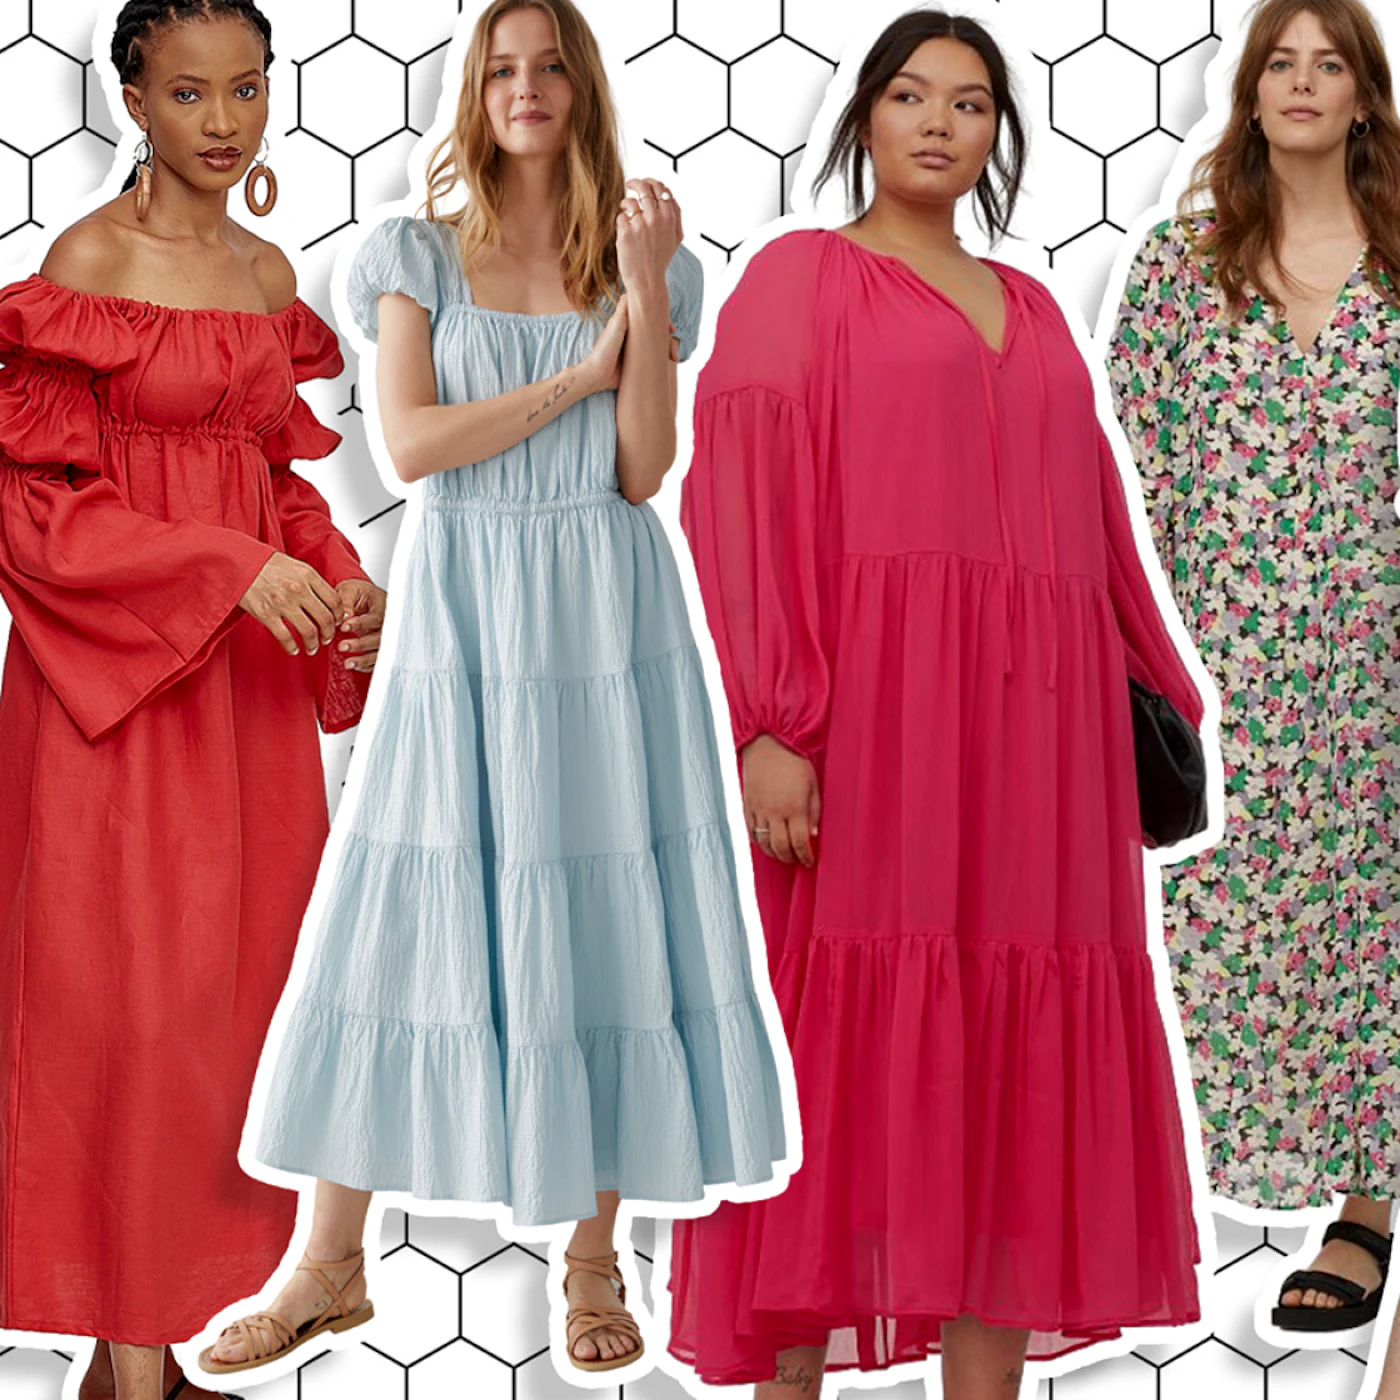 Everyday dresses: Why the throw-on-dress is your new go-to outfit